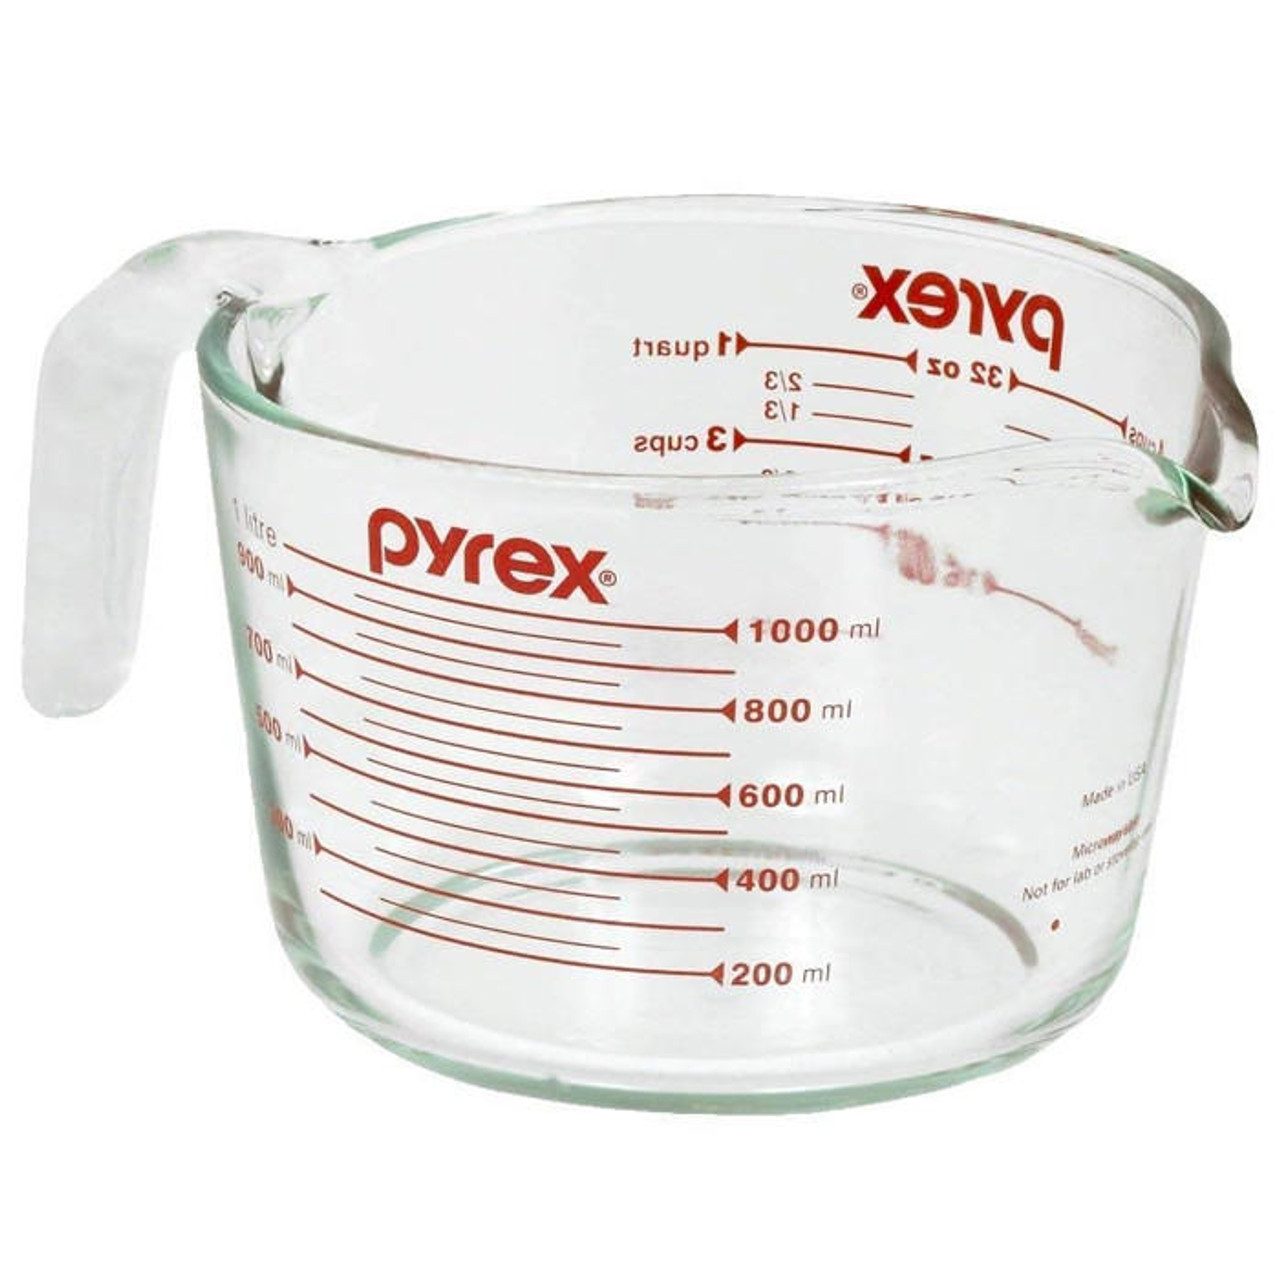 Measuring Cup (4 Cup) 